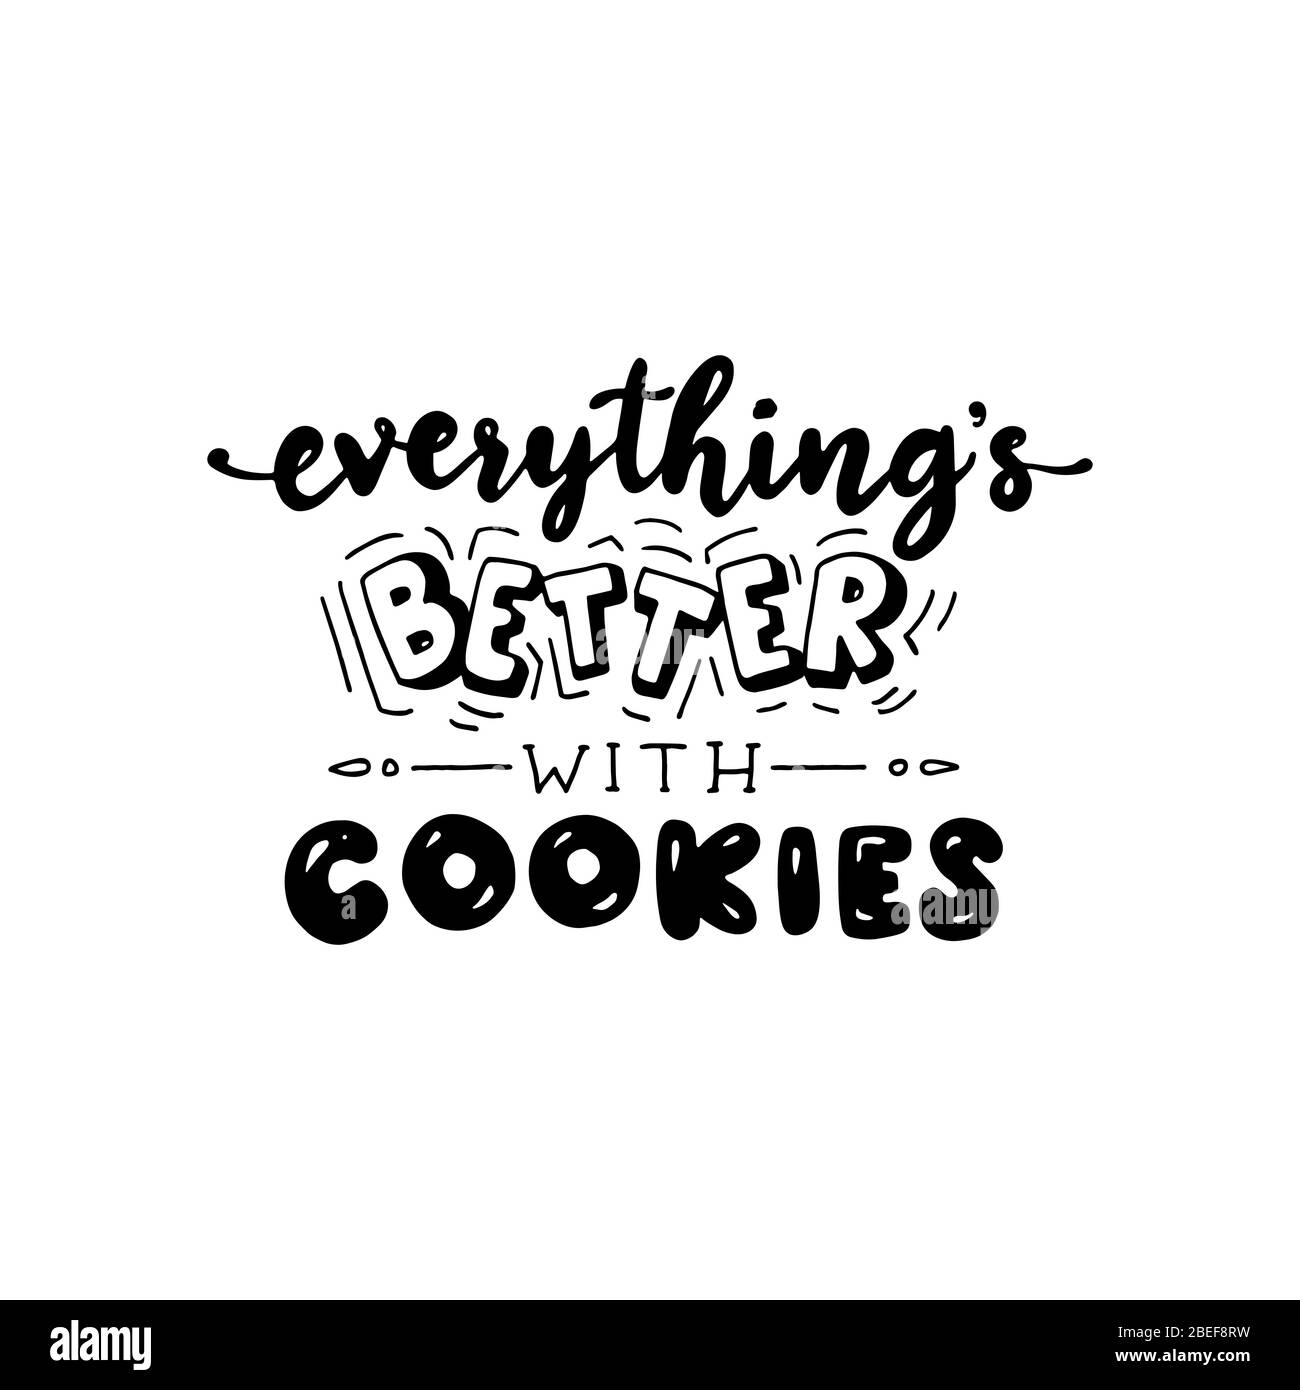 Everything’s better with cookies. Funny lettering quote. Hand drawn text for card, poster, banner, t-shirt or packaging design. Stock Vector